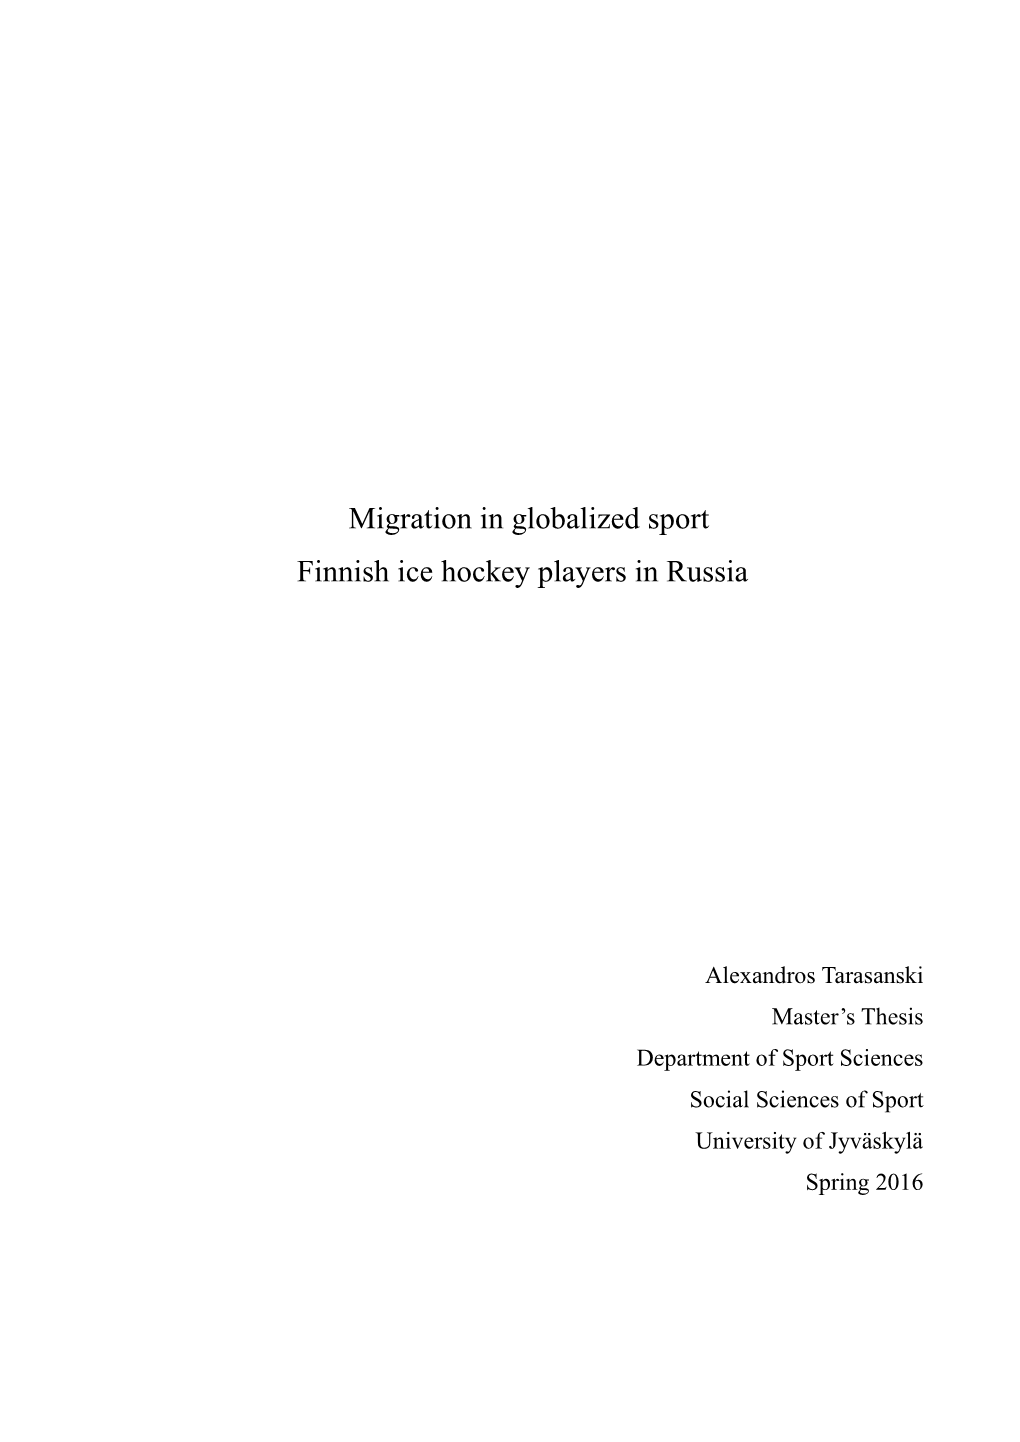 Migration in Globalized Sport Finnish Ice Hockey Players in Russia